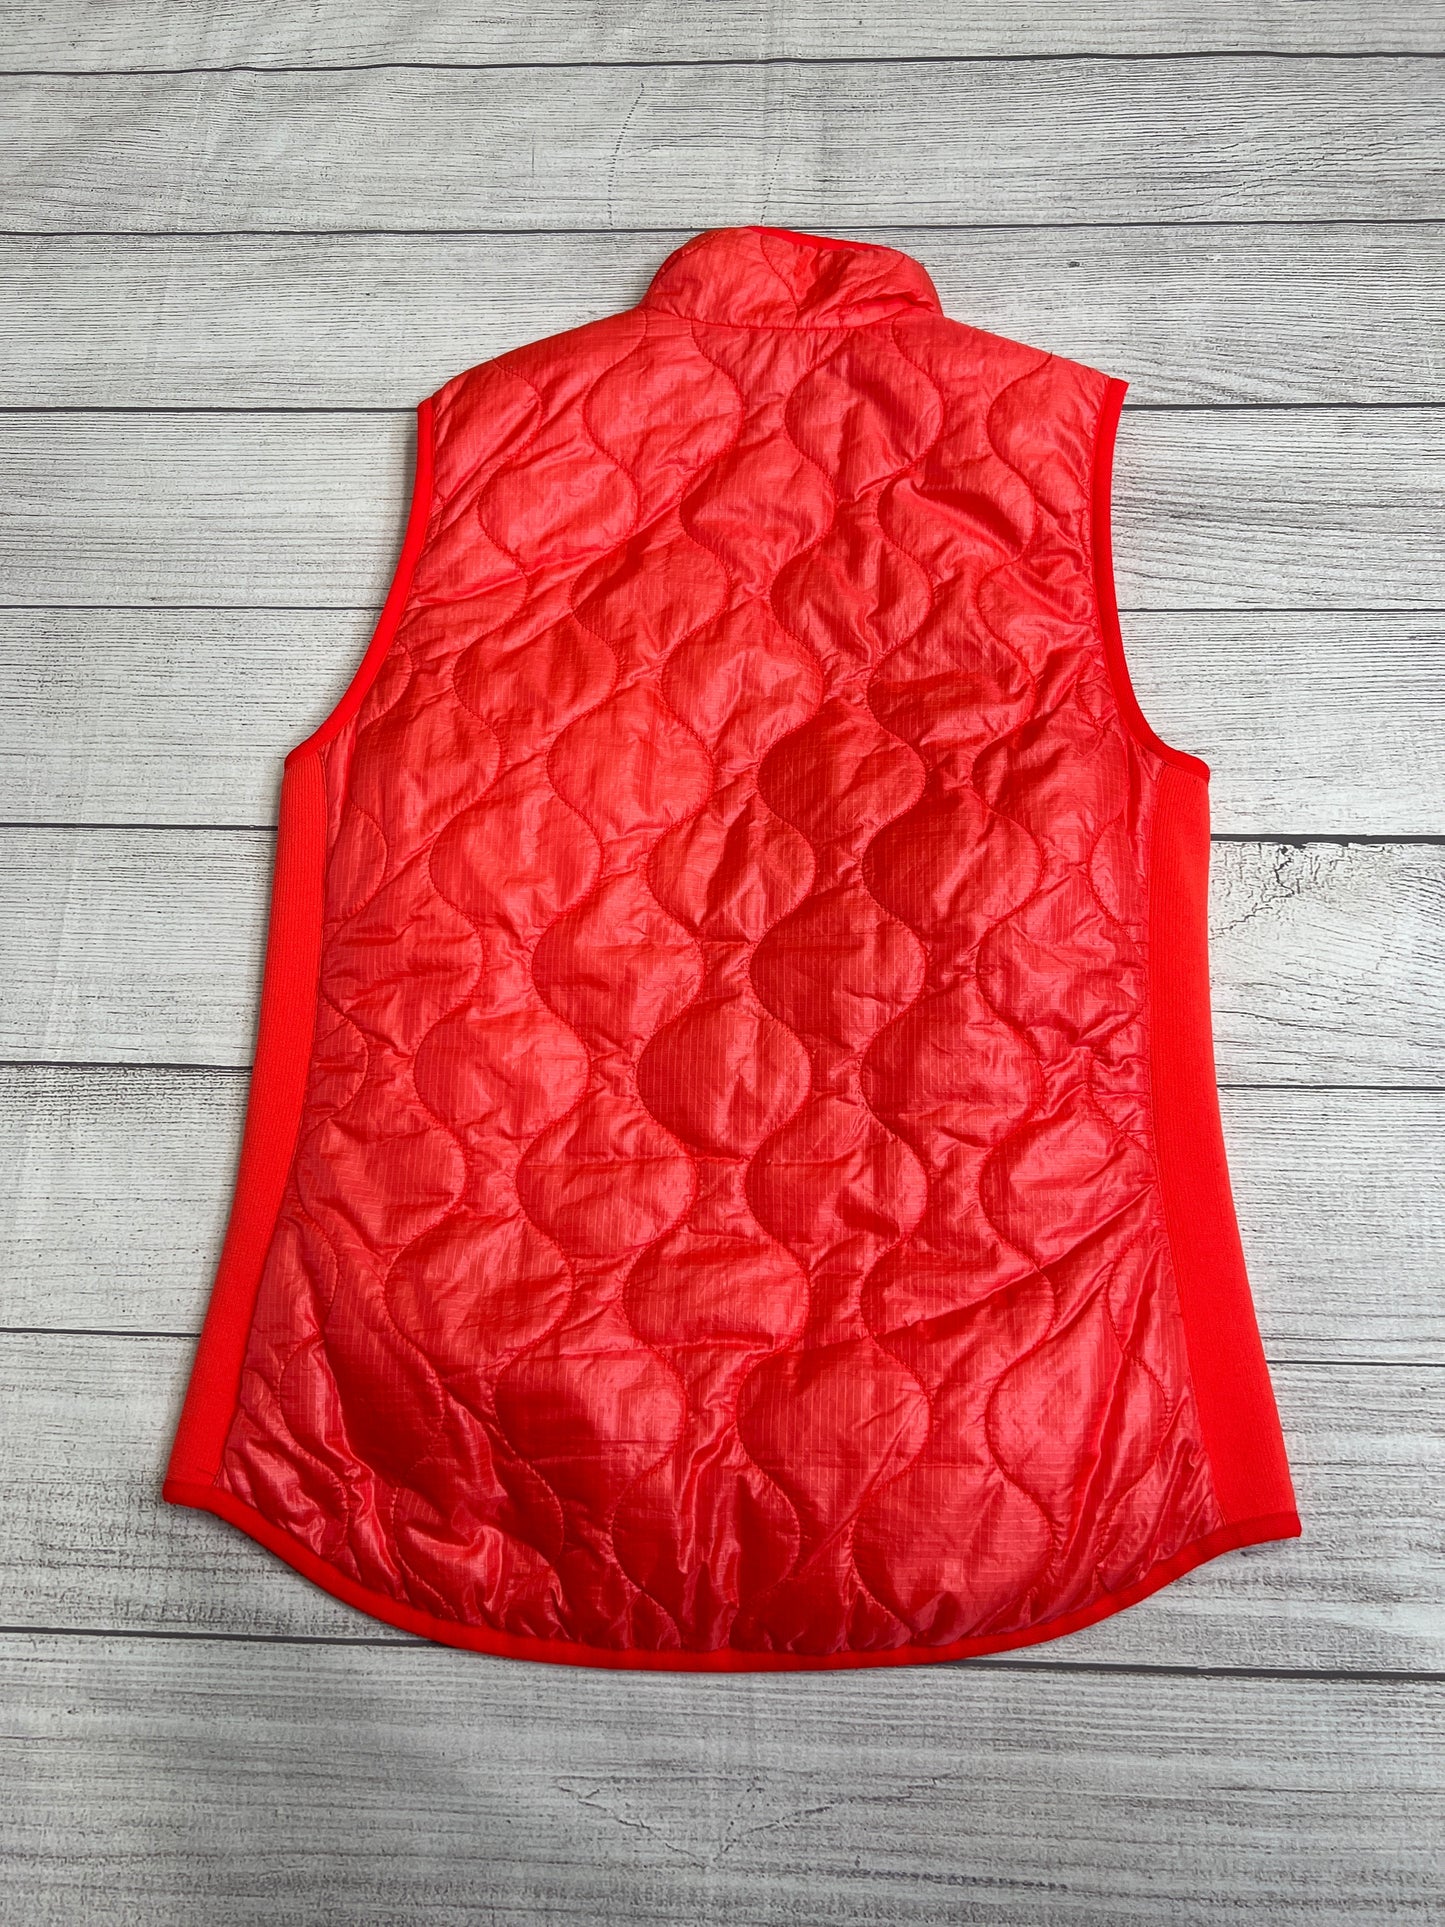 Vest Puffer & Quilted By J Crew  Size: Xs